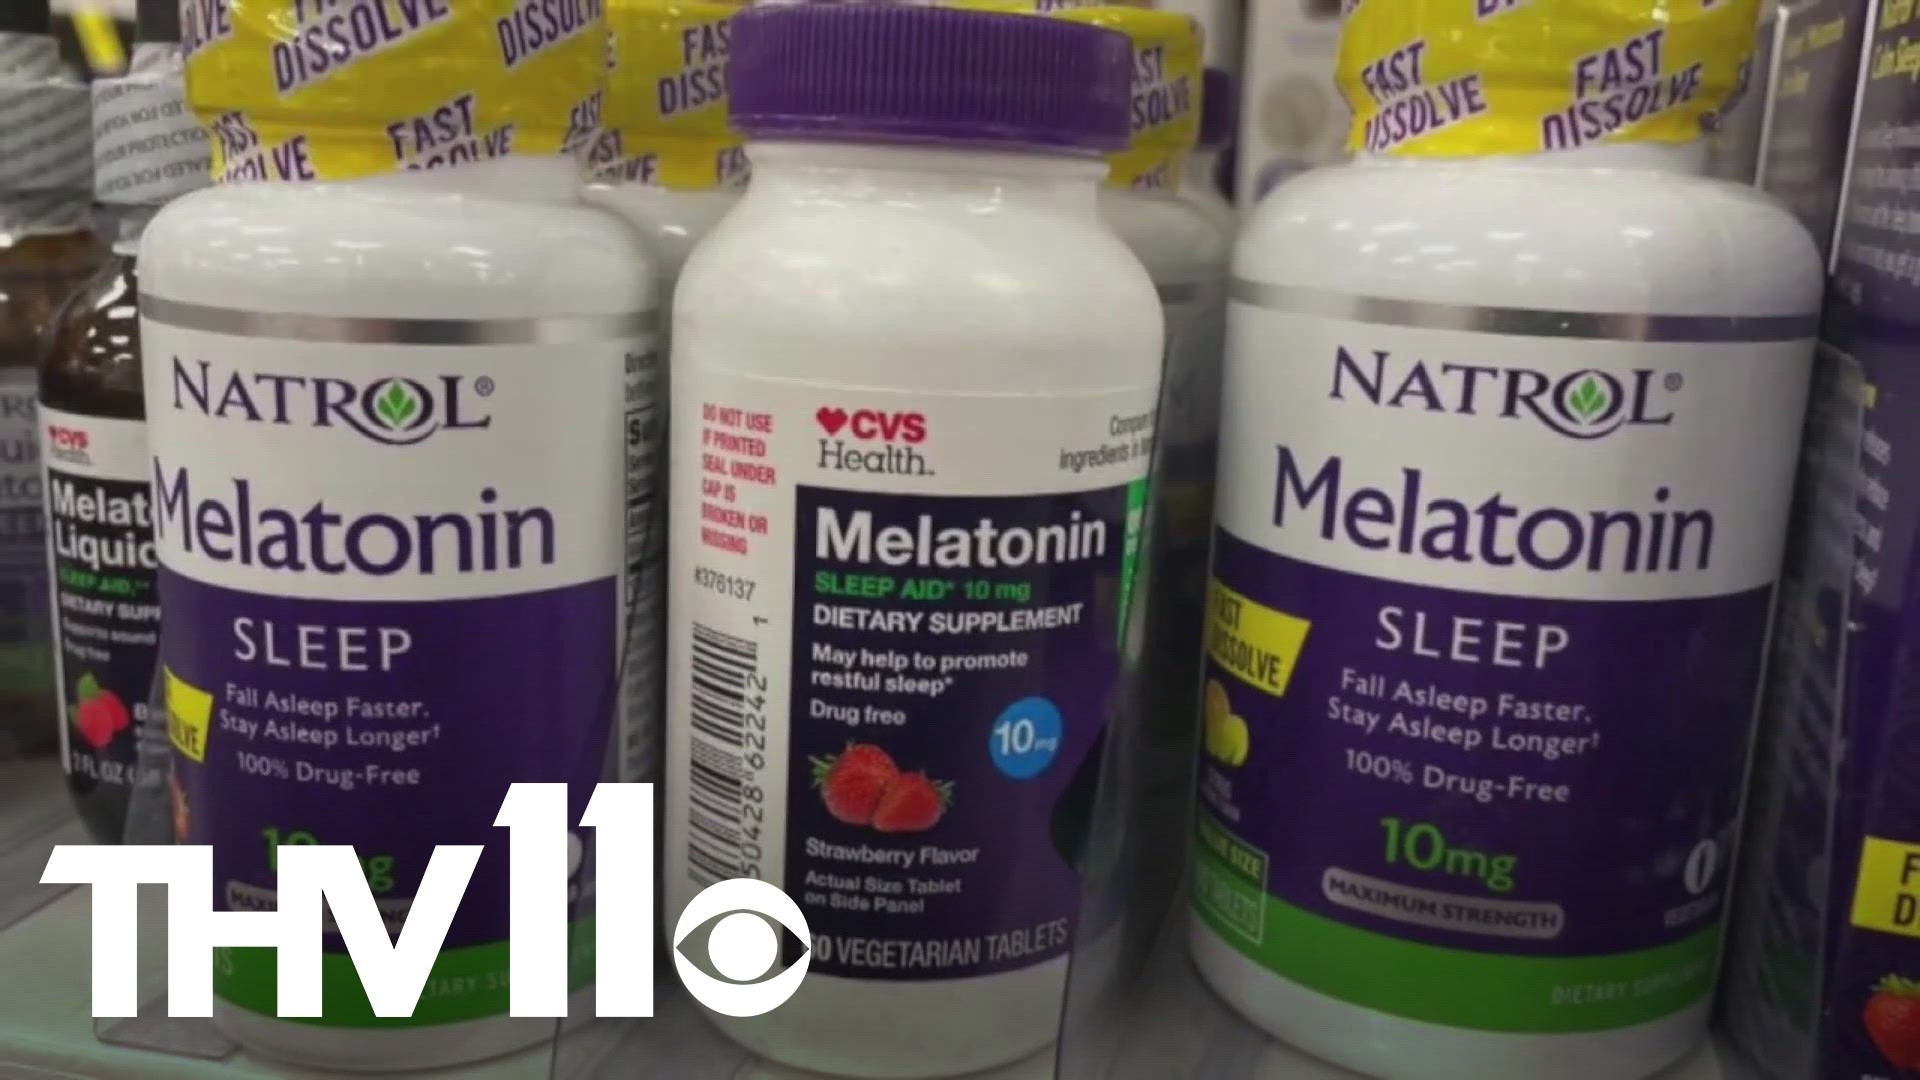 The medical community is expressing concern over what might seem like a miracle sleep medicine but could be more harmful than helpful – melatonin.